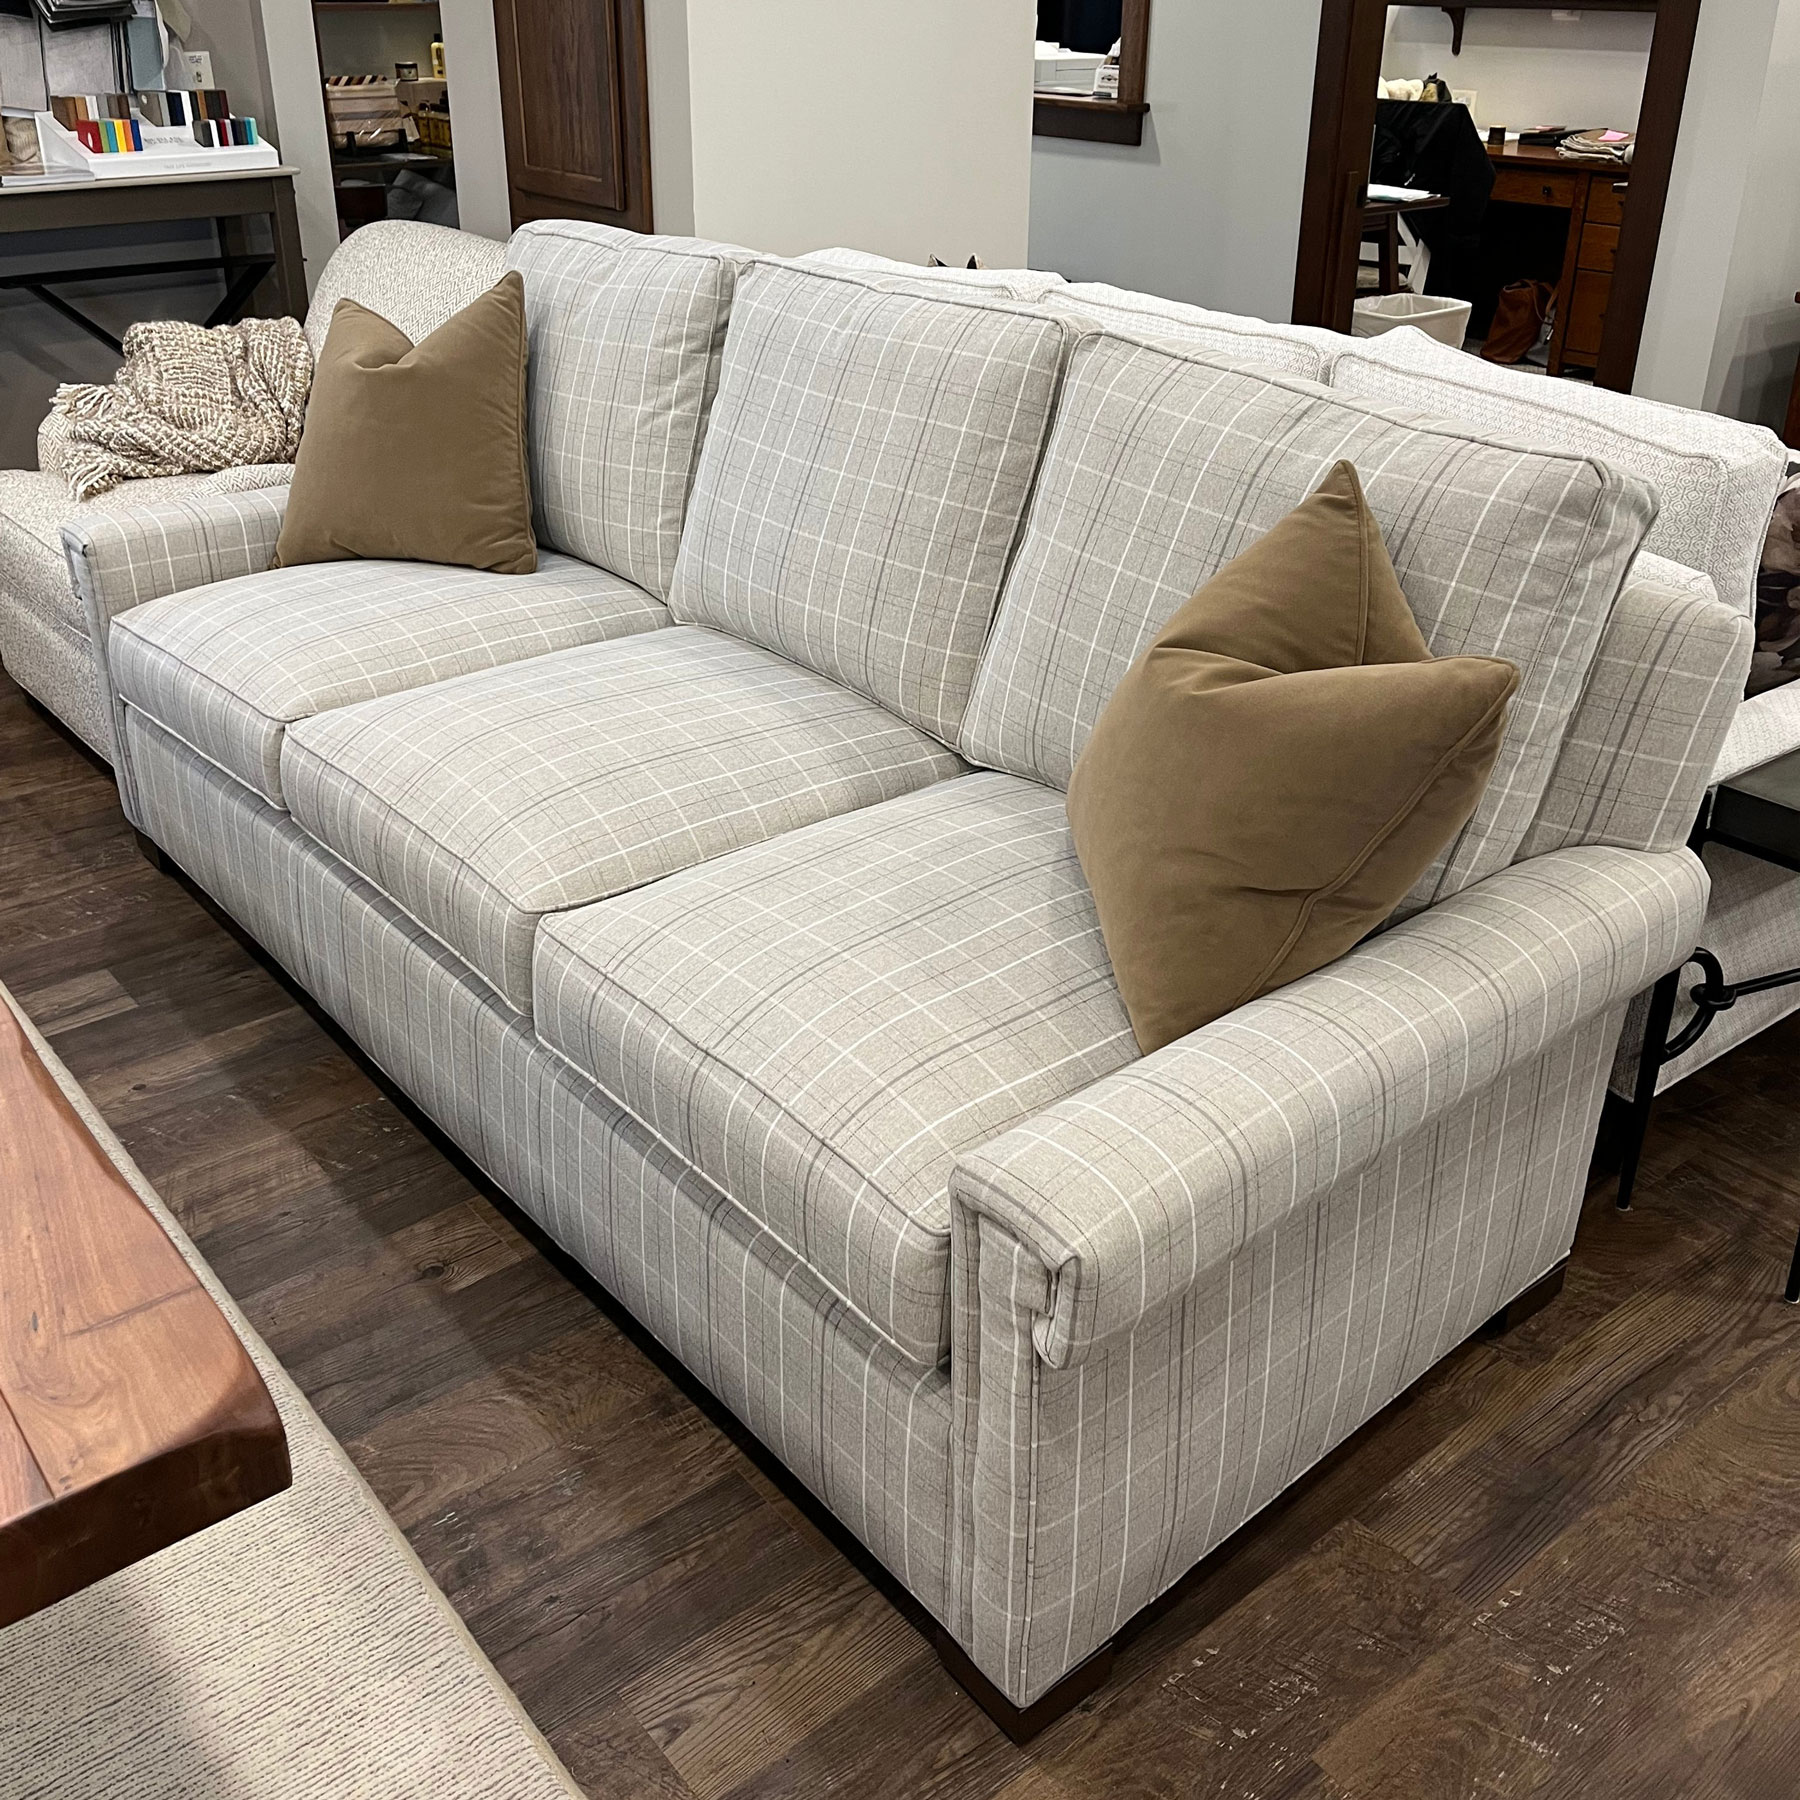 Wesley Hall Signature Elements Extended Depth Long Sofa in Fabric